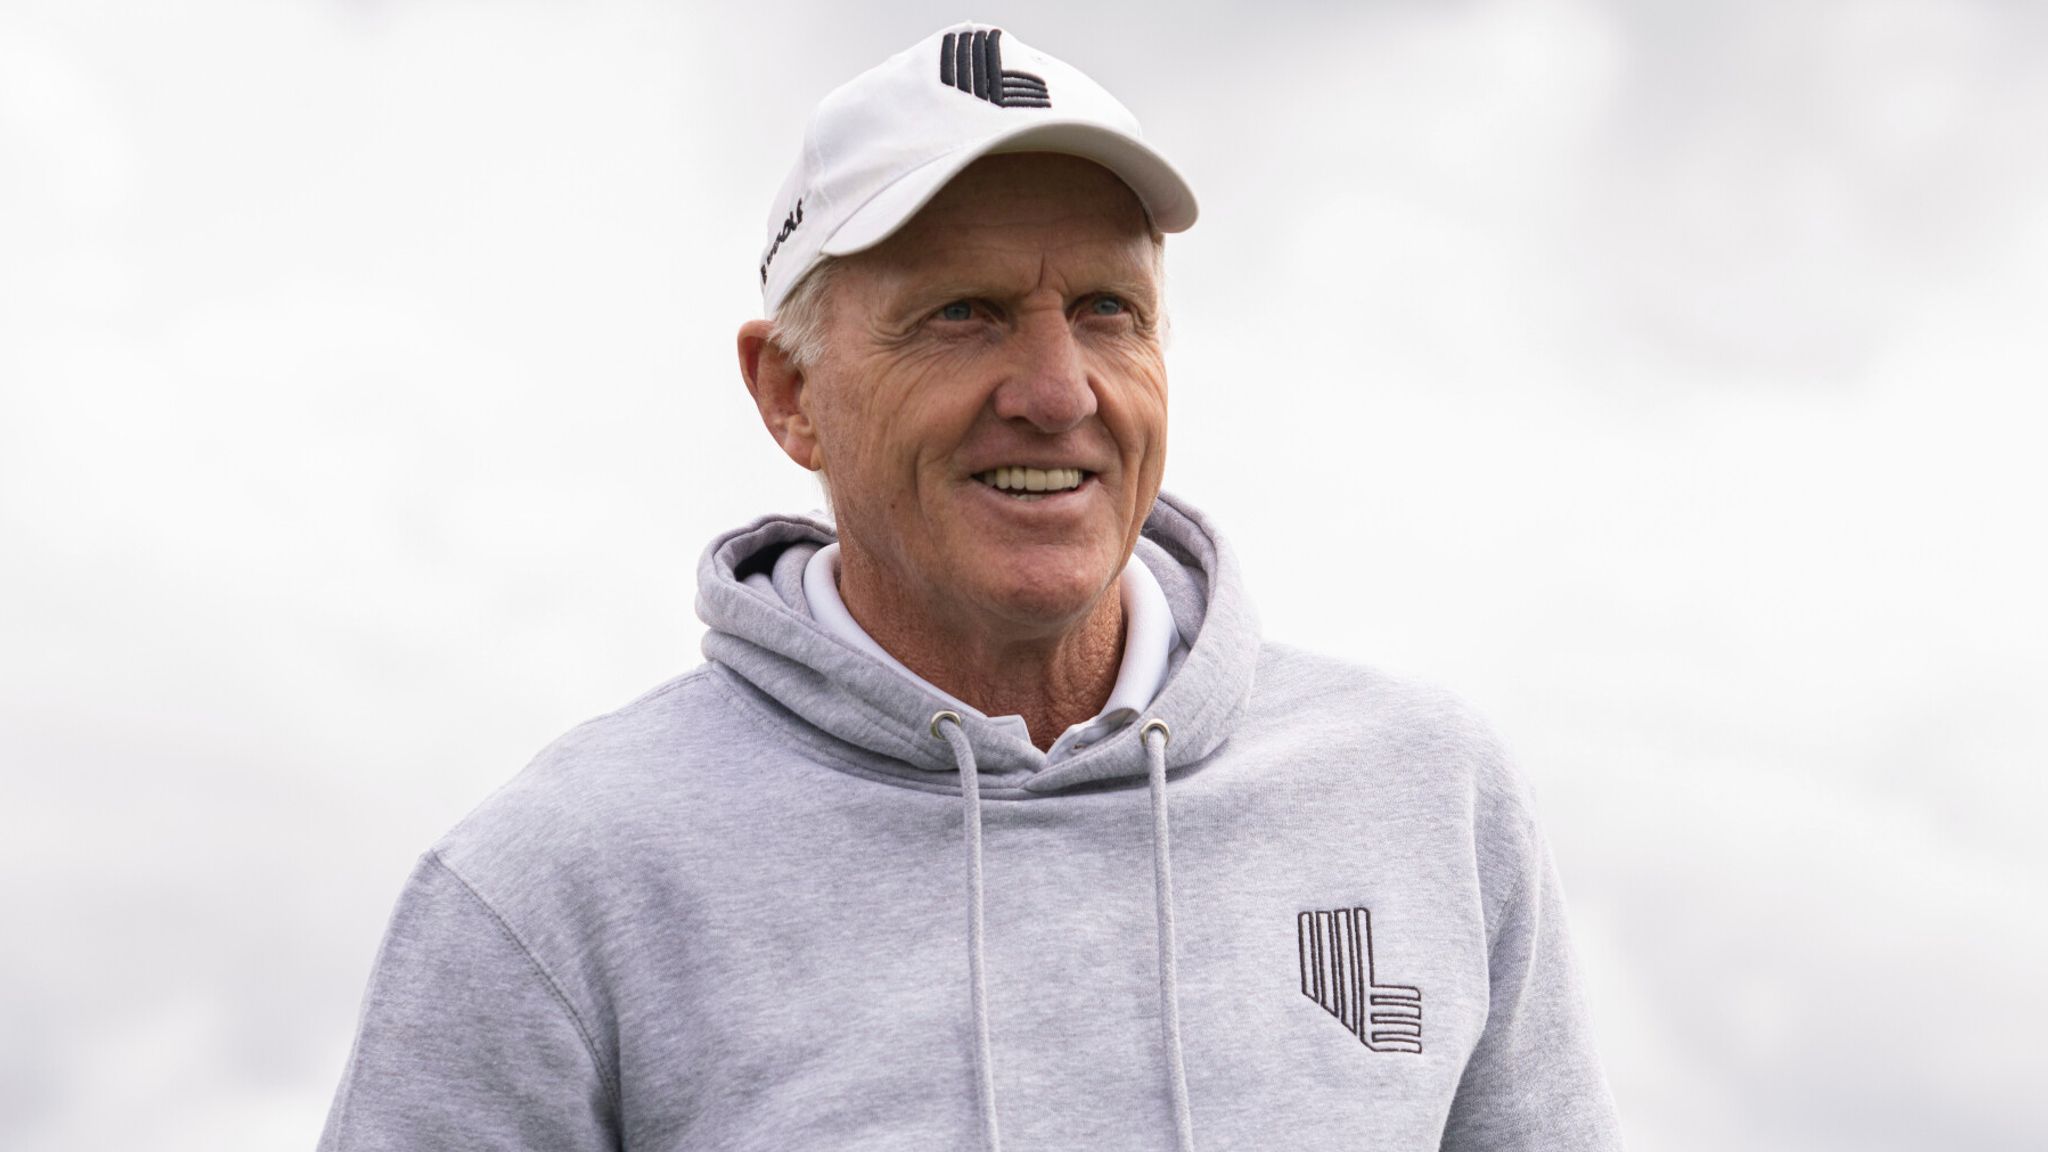 LIV Golf considering creating women's tour, says CEO Greg Norman | Golf ...